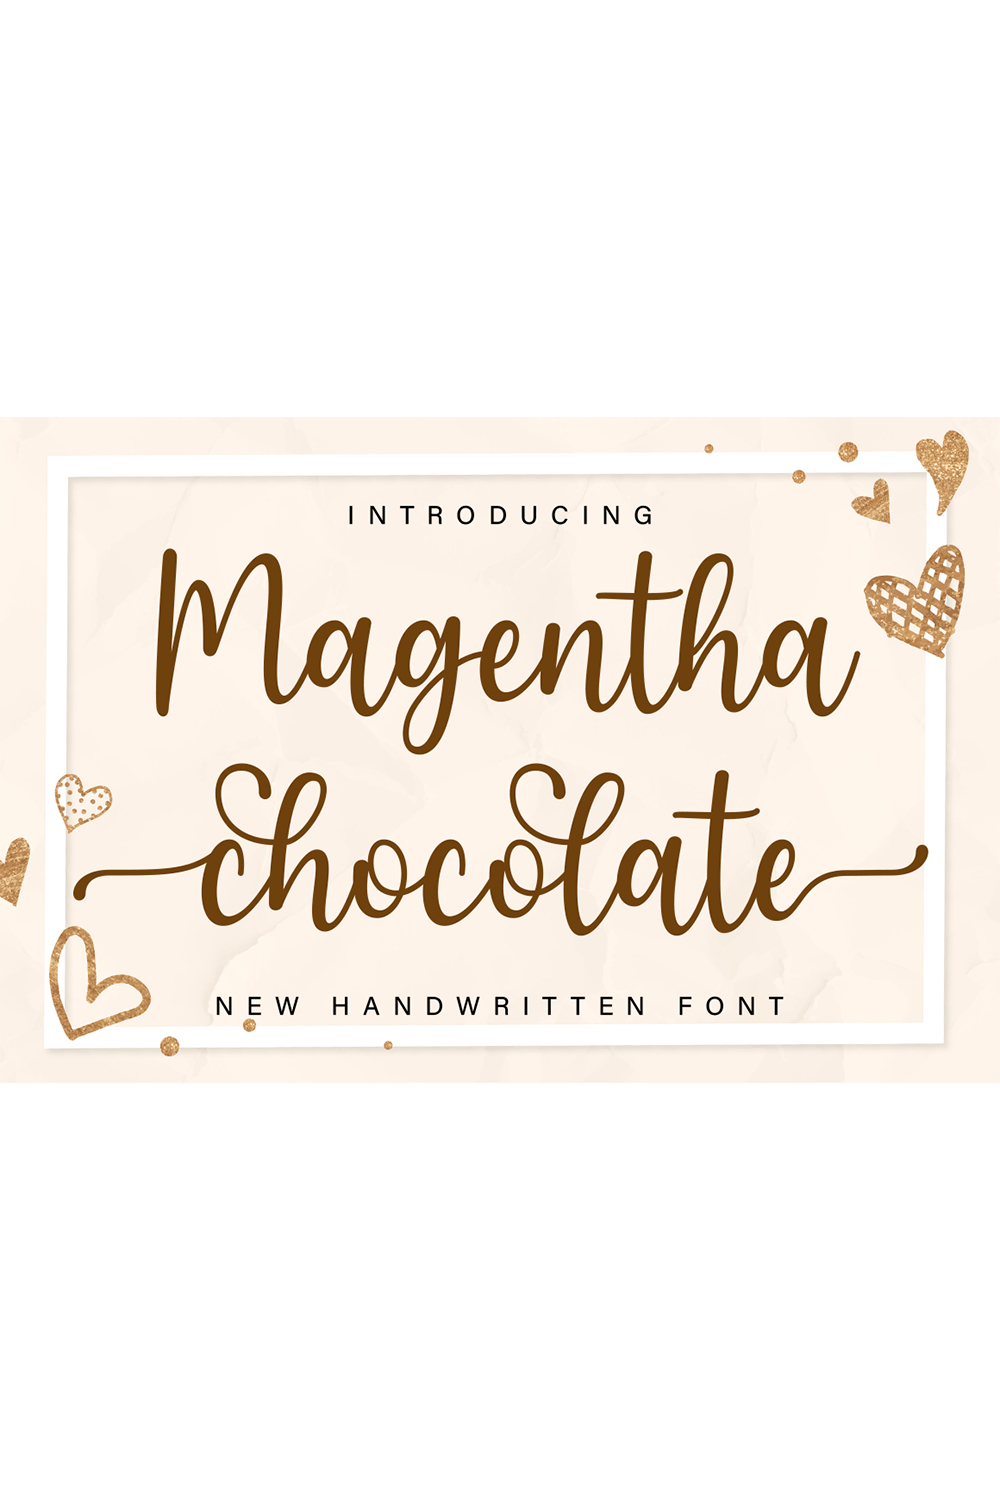 Magentha Chocolate pinterest preview image.